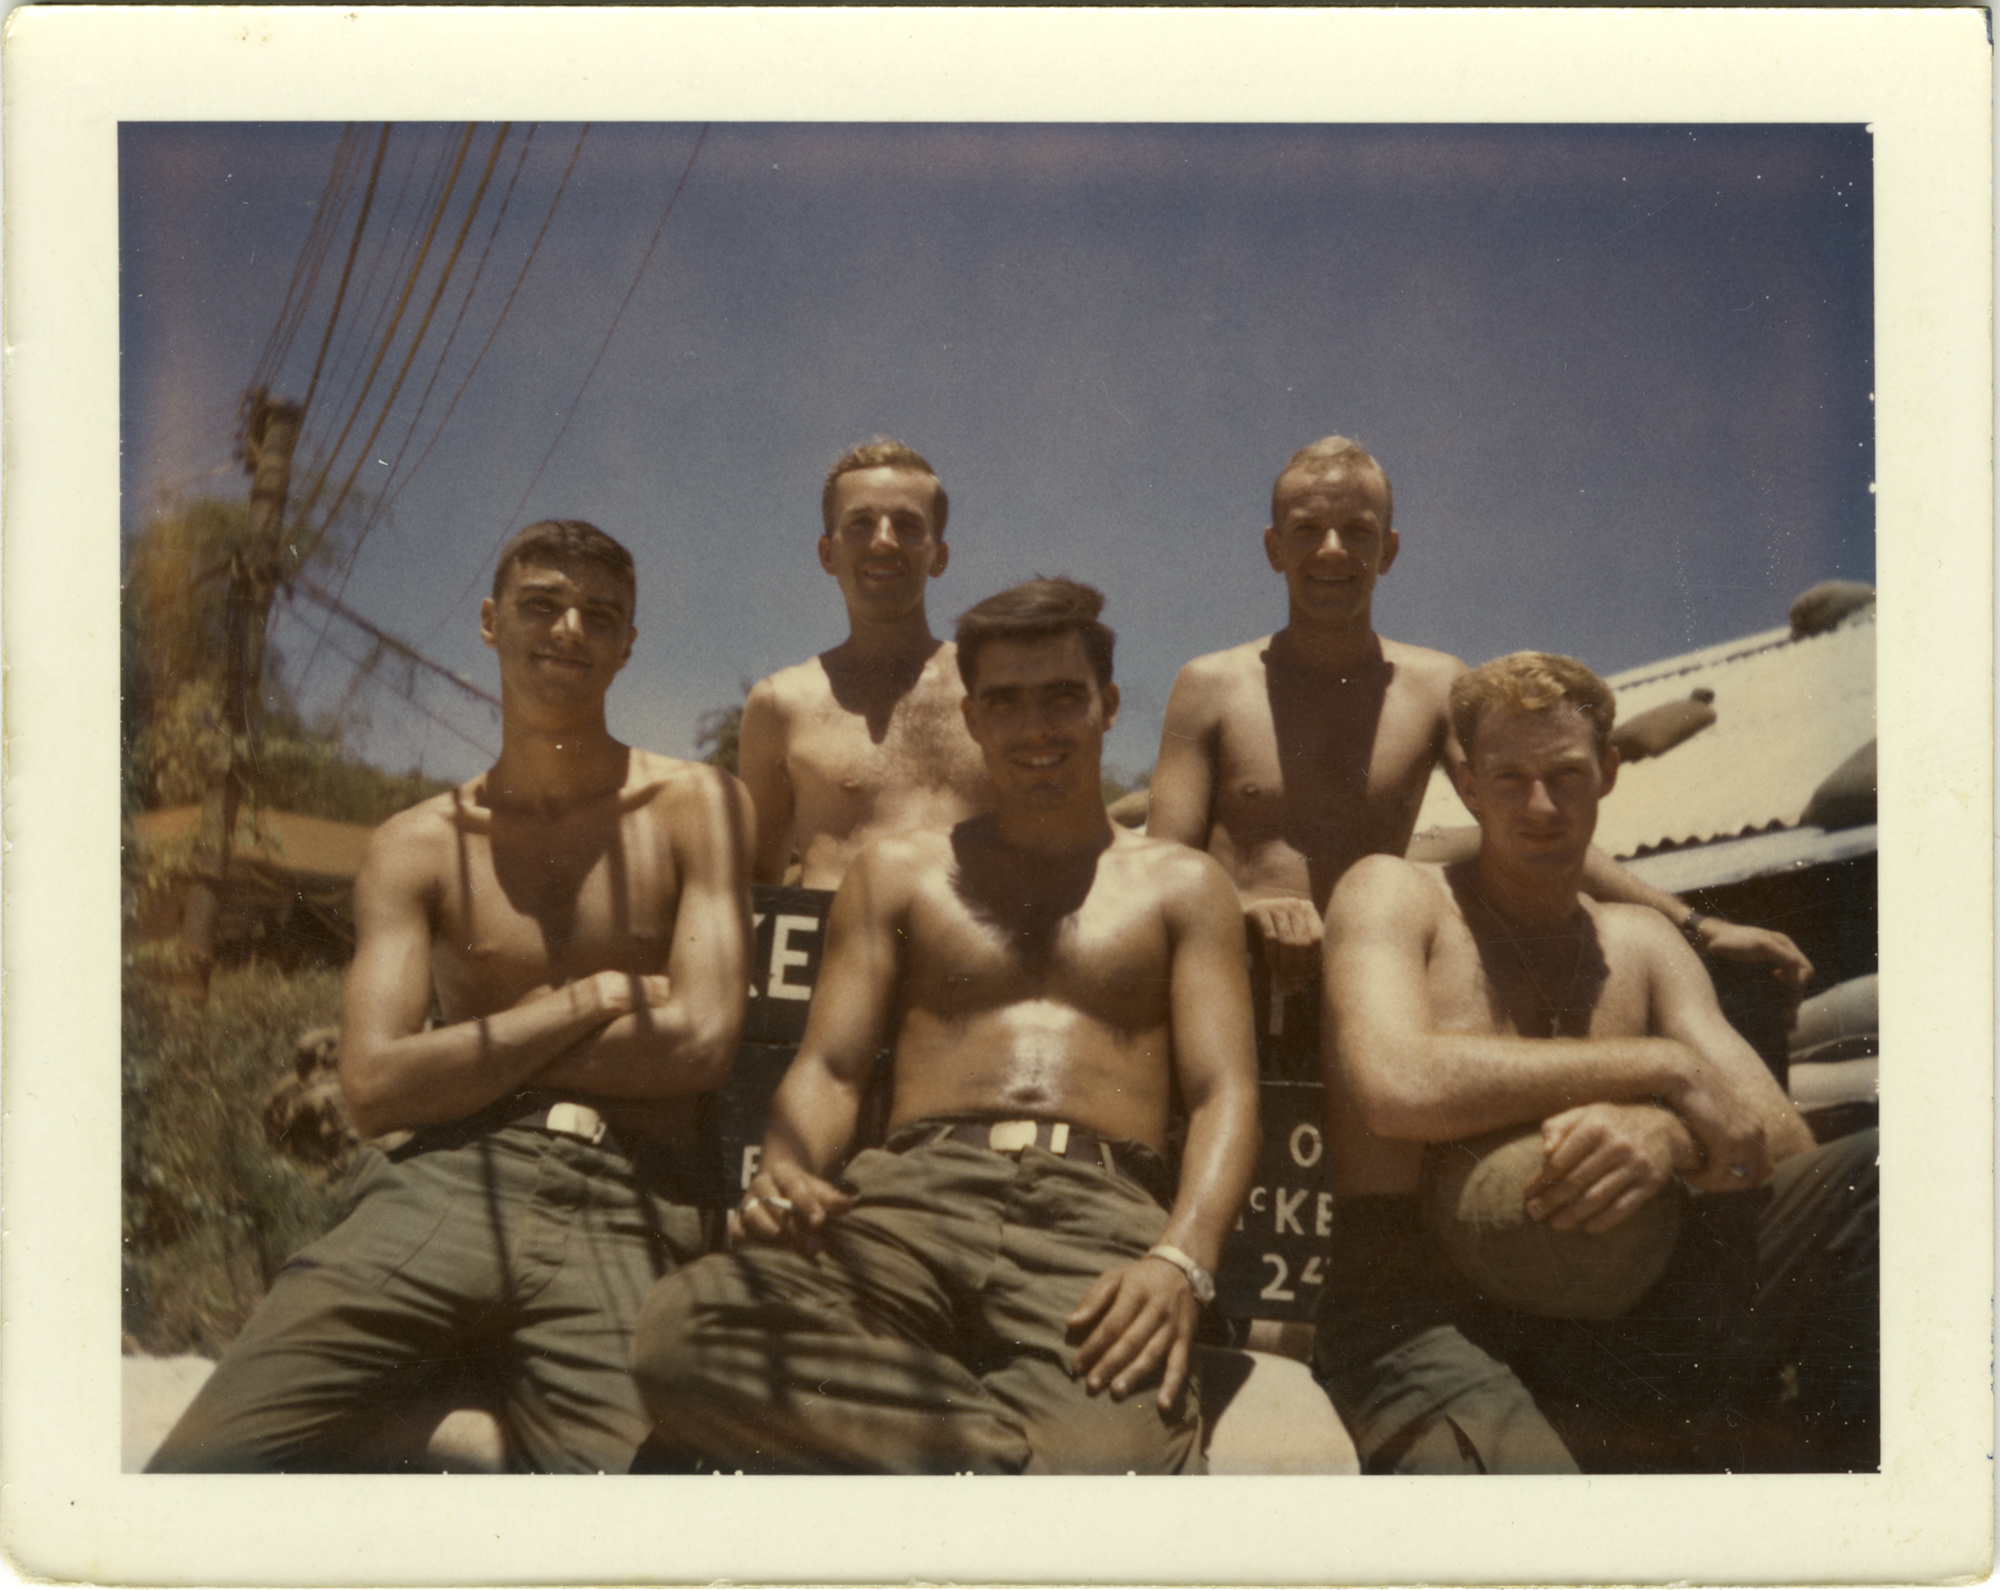 A group of five soldiers, shirtless and wearing green fatigue pants